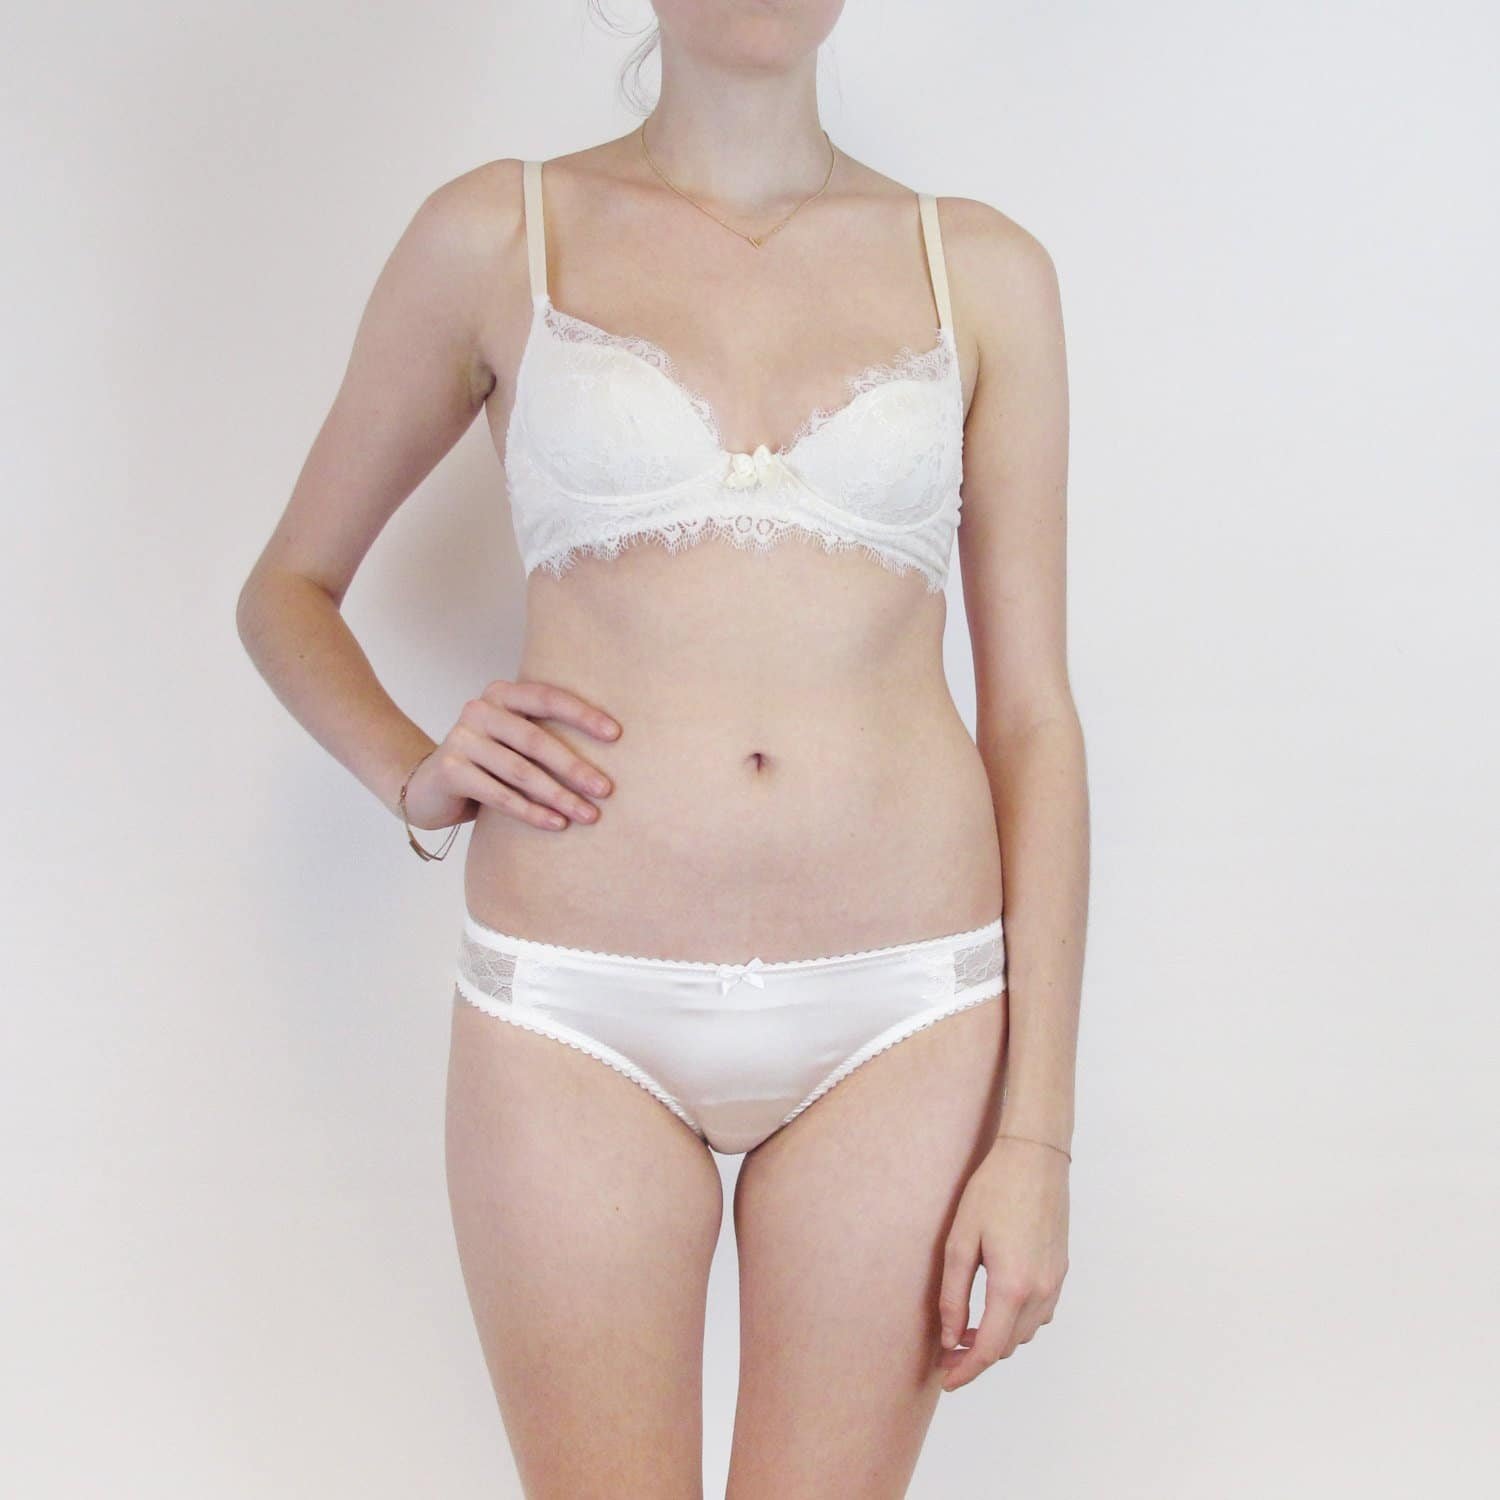 White Lace plunge lingerie set: bra and panties in off-white chantilly lace